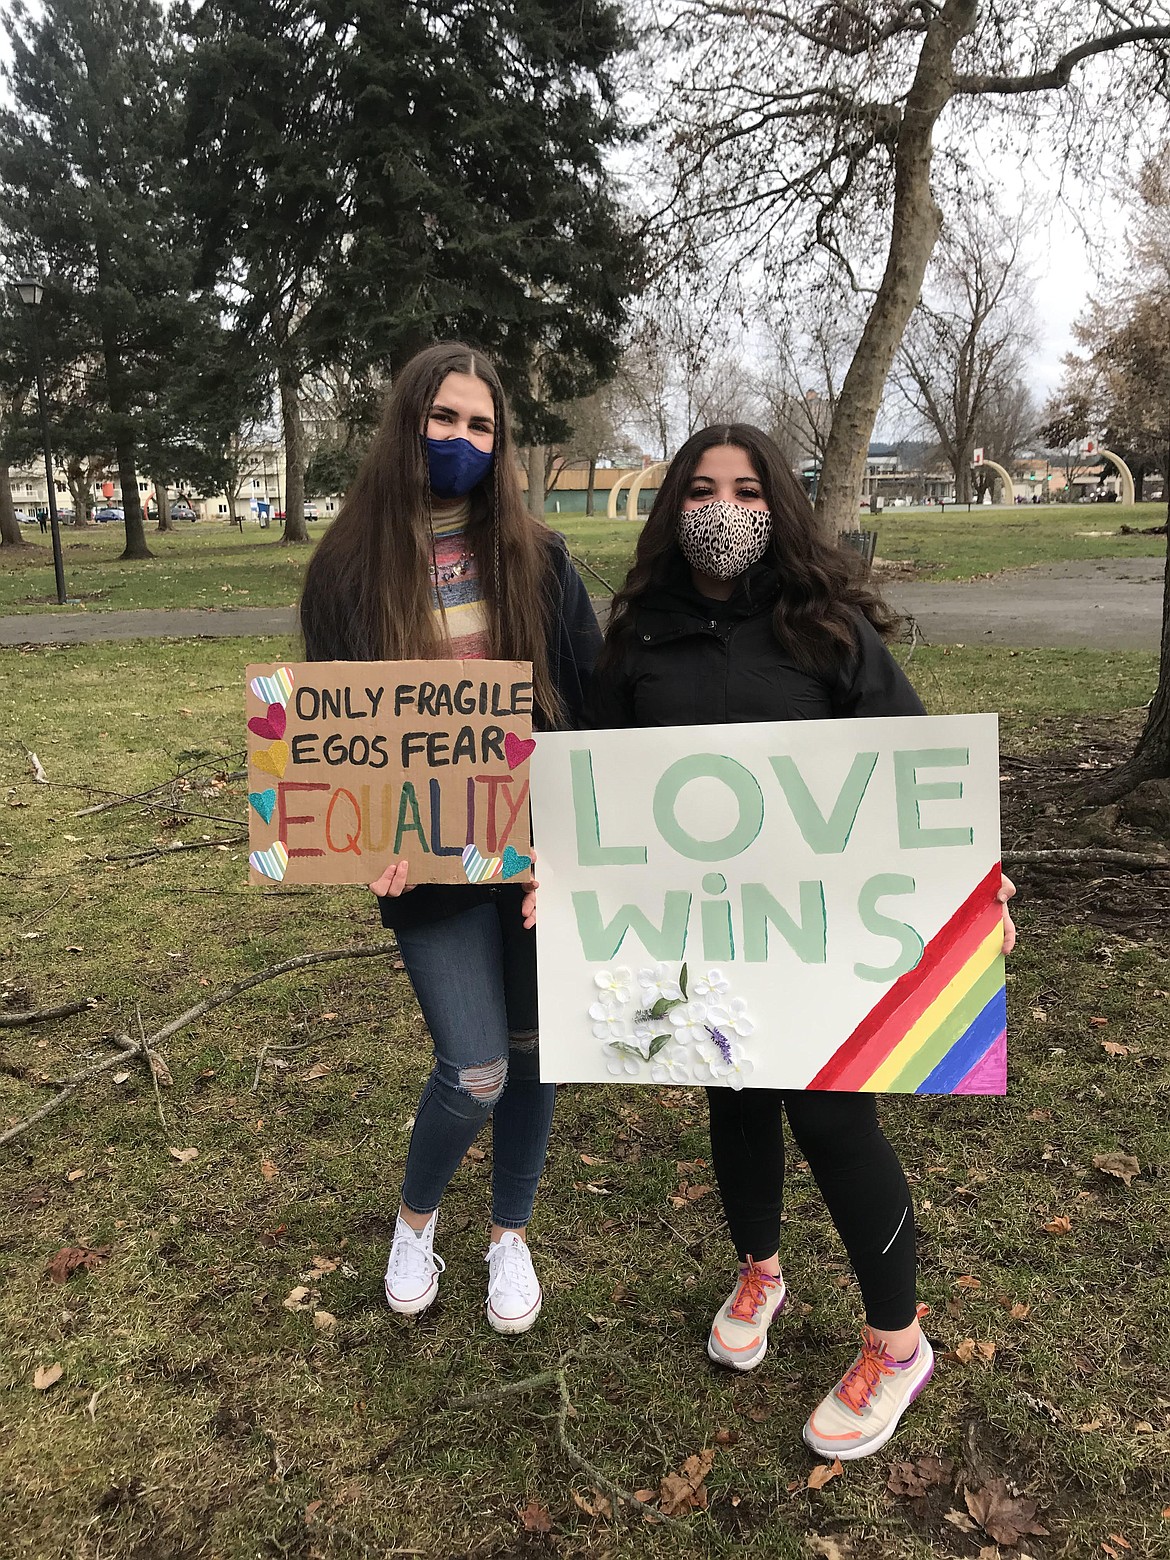 Abby Fitzgerald (left) and Izabella Swanson remind their community that equality and love wins.